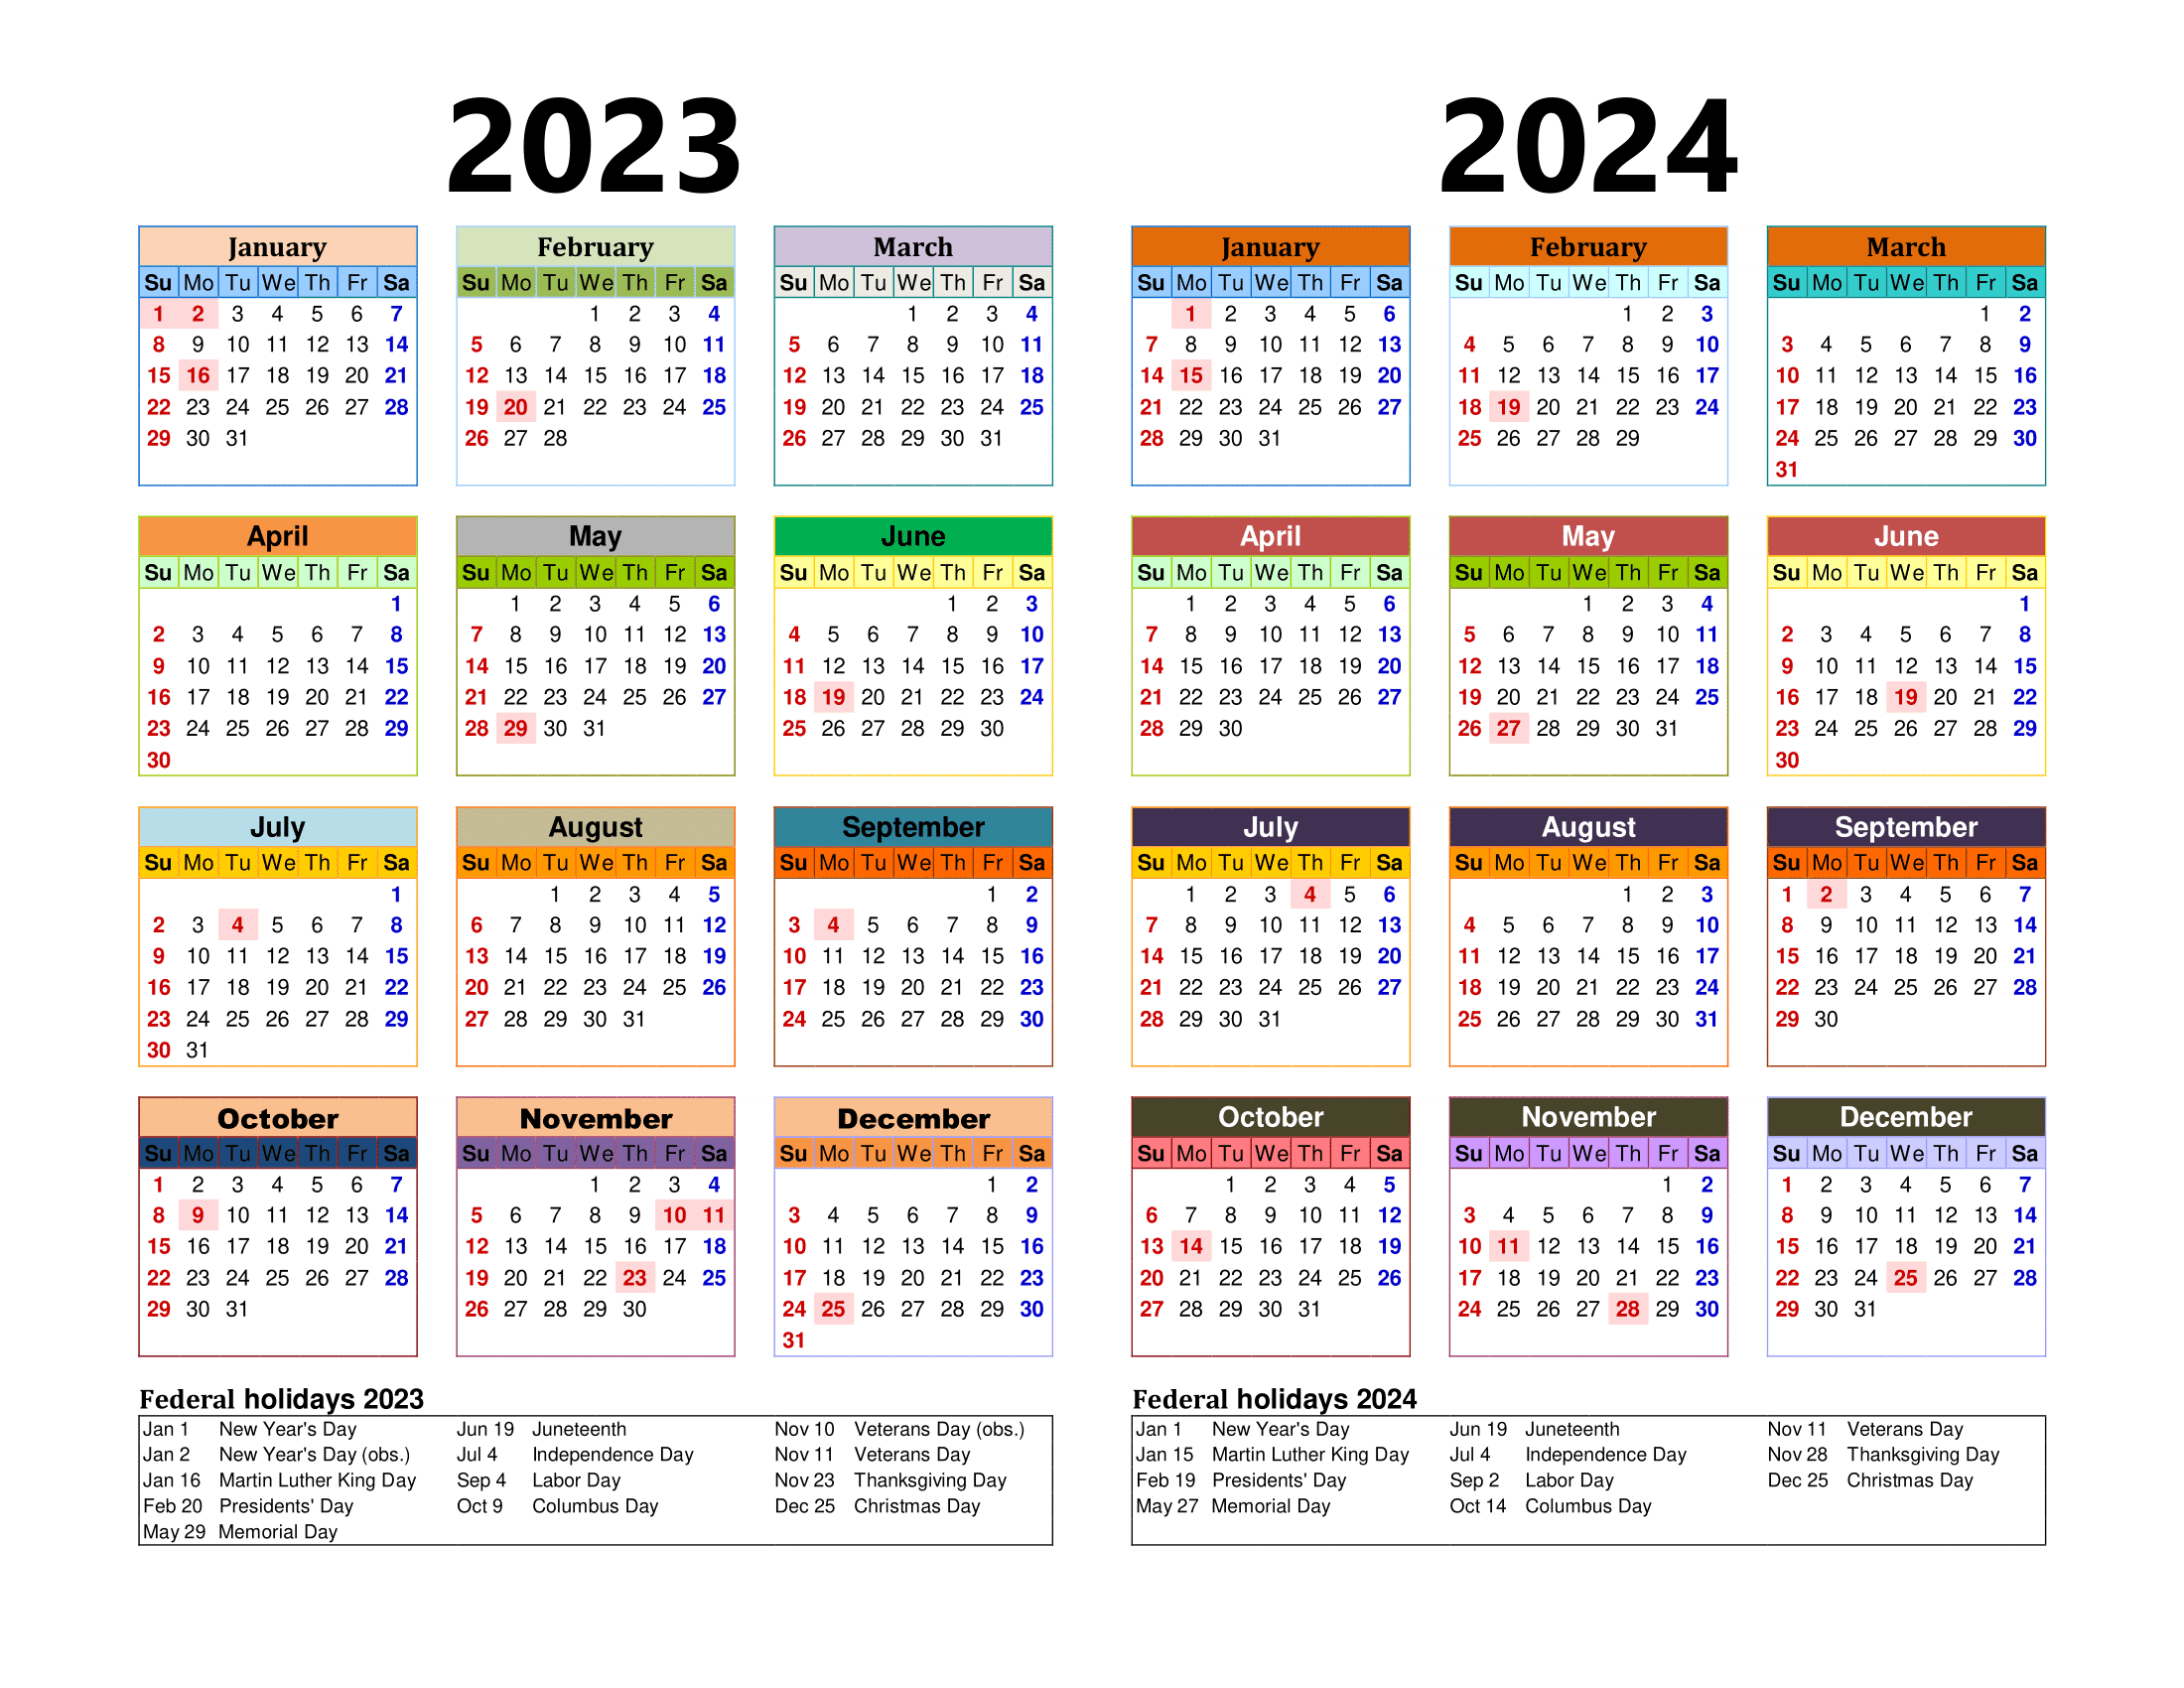 Free Printable Two Year Calendar Templates For 2023 And 2024 In Pdf for 2023-2024 Calendar Printable